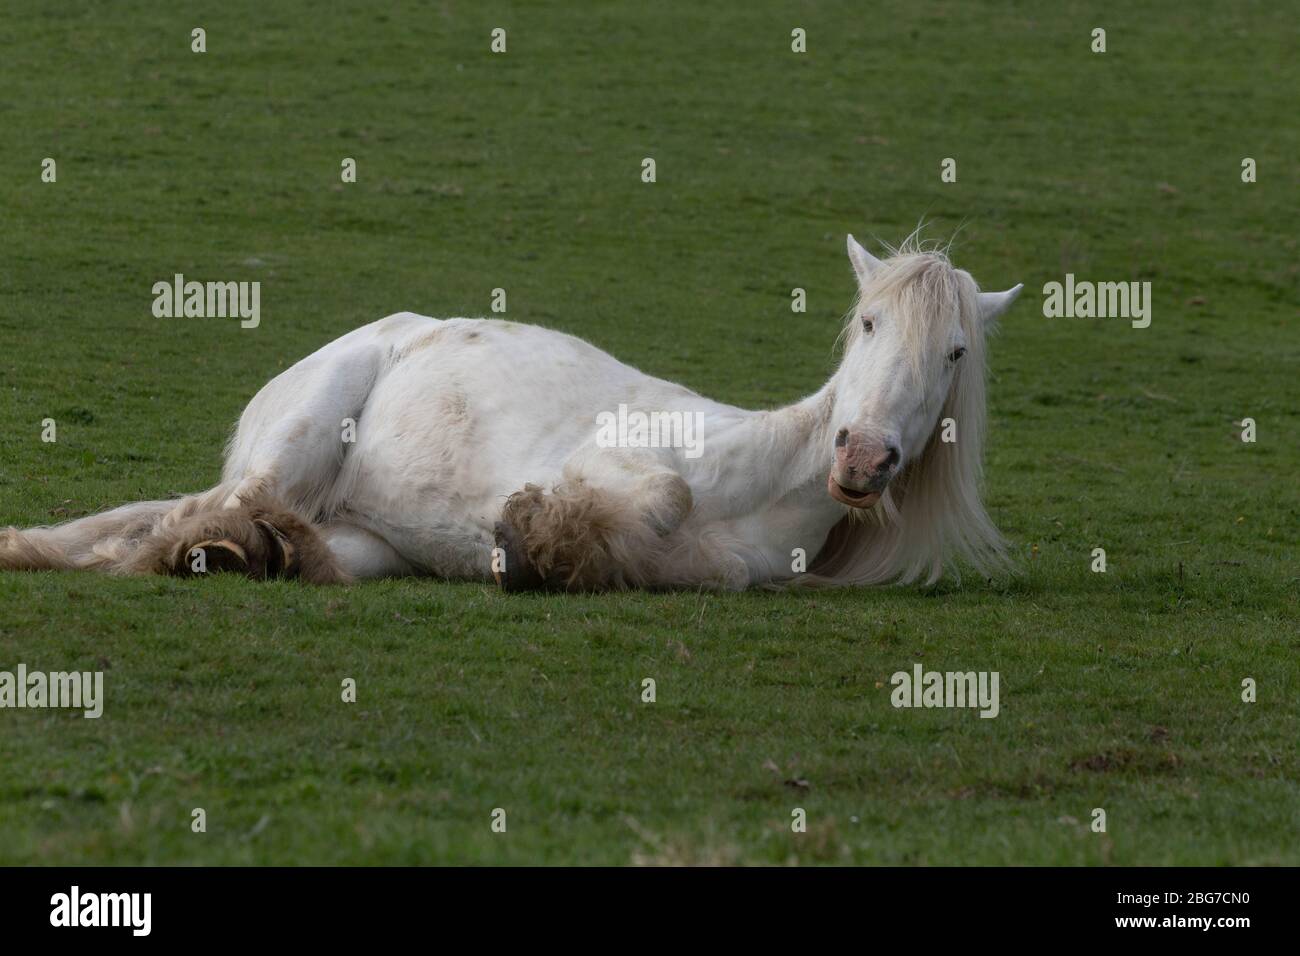 A white mare lying on the grass with her head up. Stock Photo